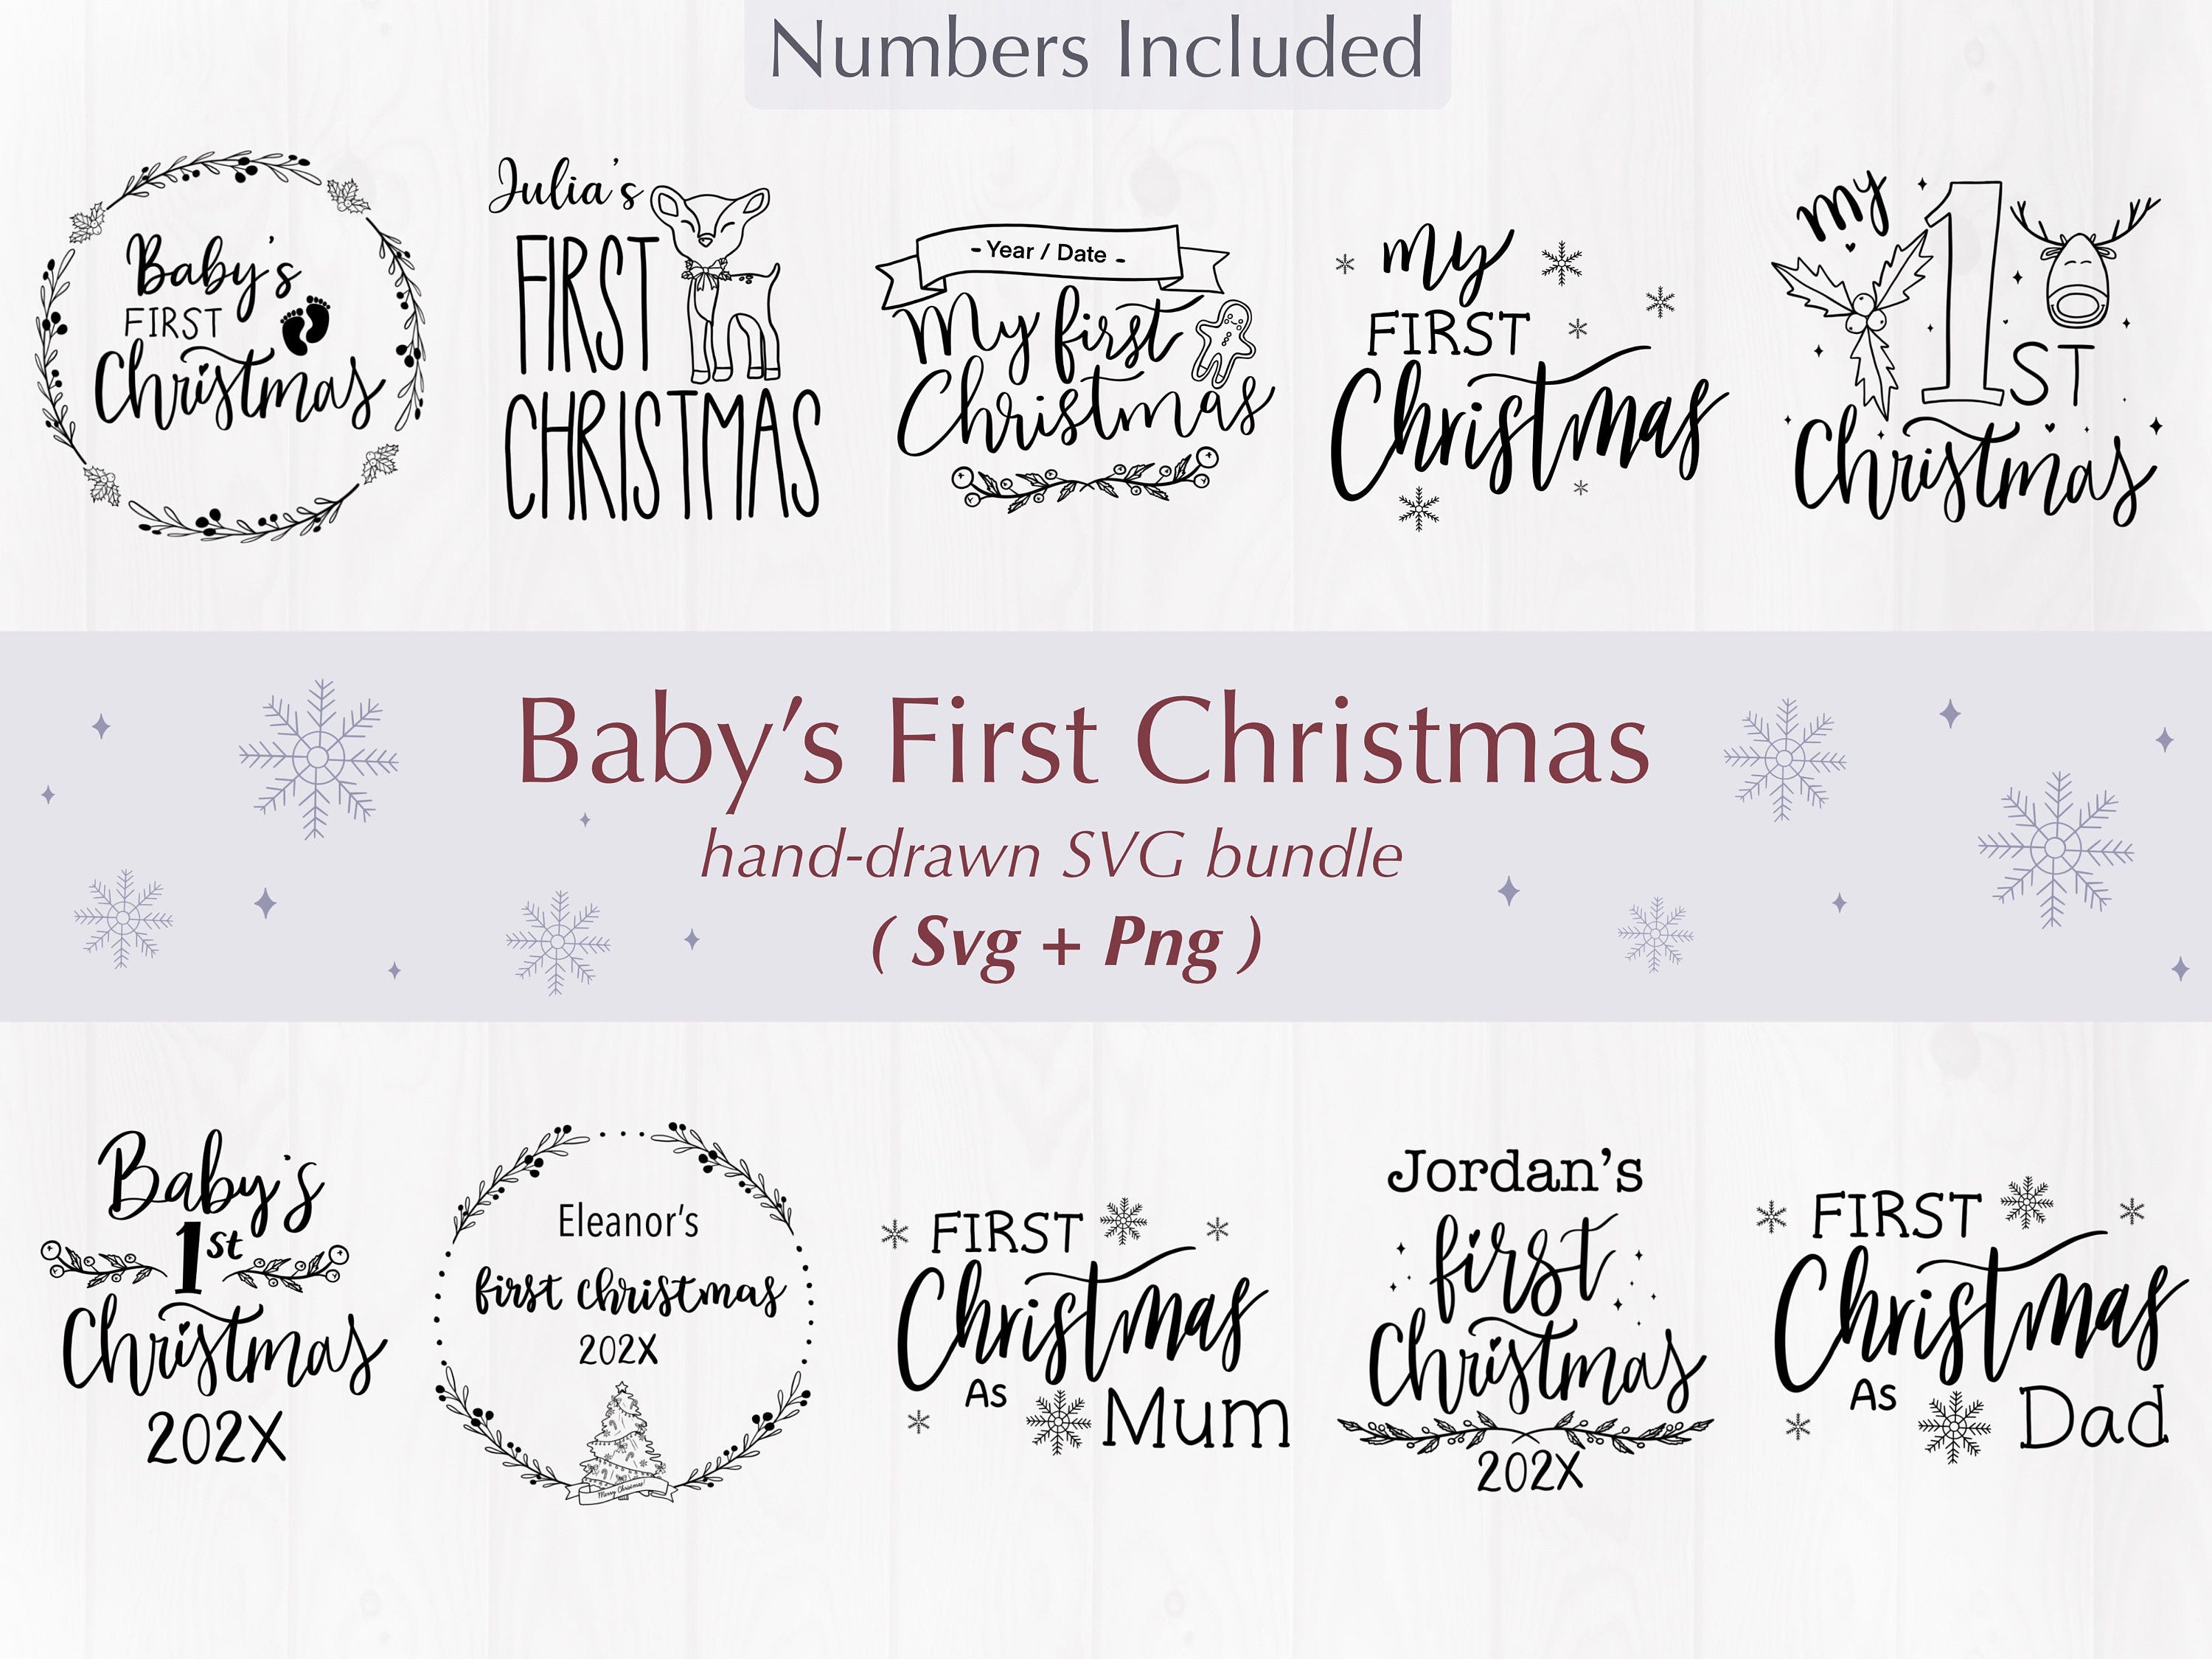 Baby’s first Christmas svg bundle | My first Christmas svg | First Christmas svg | baby’s first Christmas svg | ornament svg